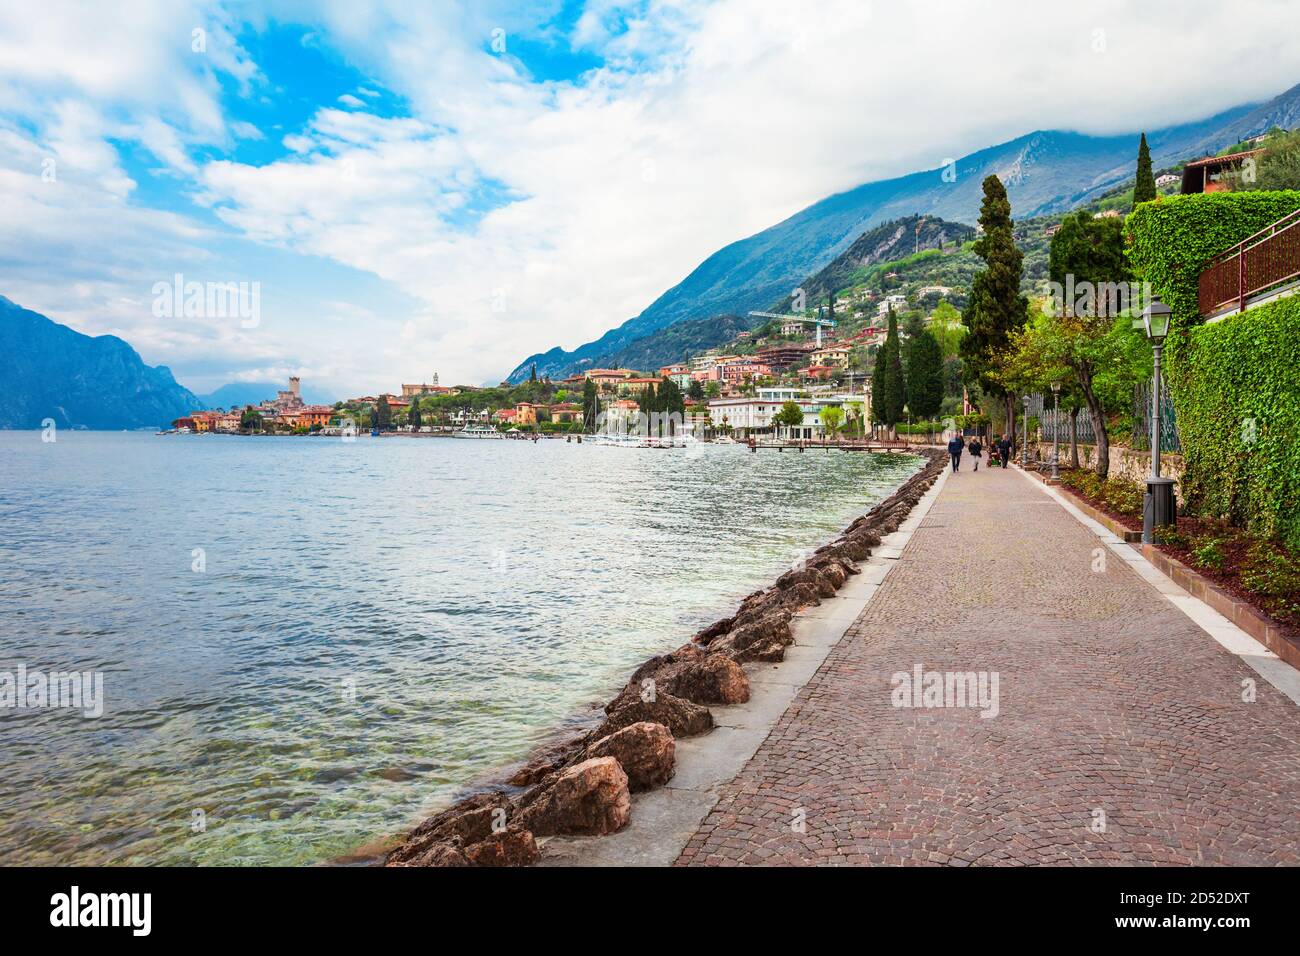 Malcesine old town on the shore of Lake Garda in Verona province, Italy Stock Photo